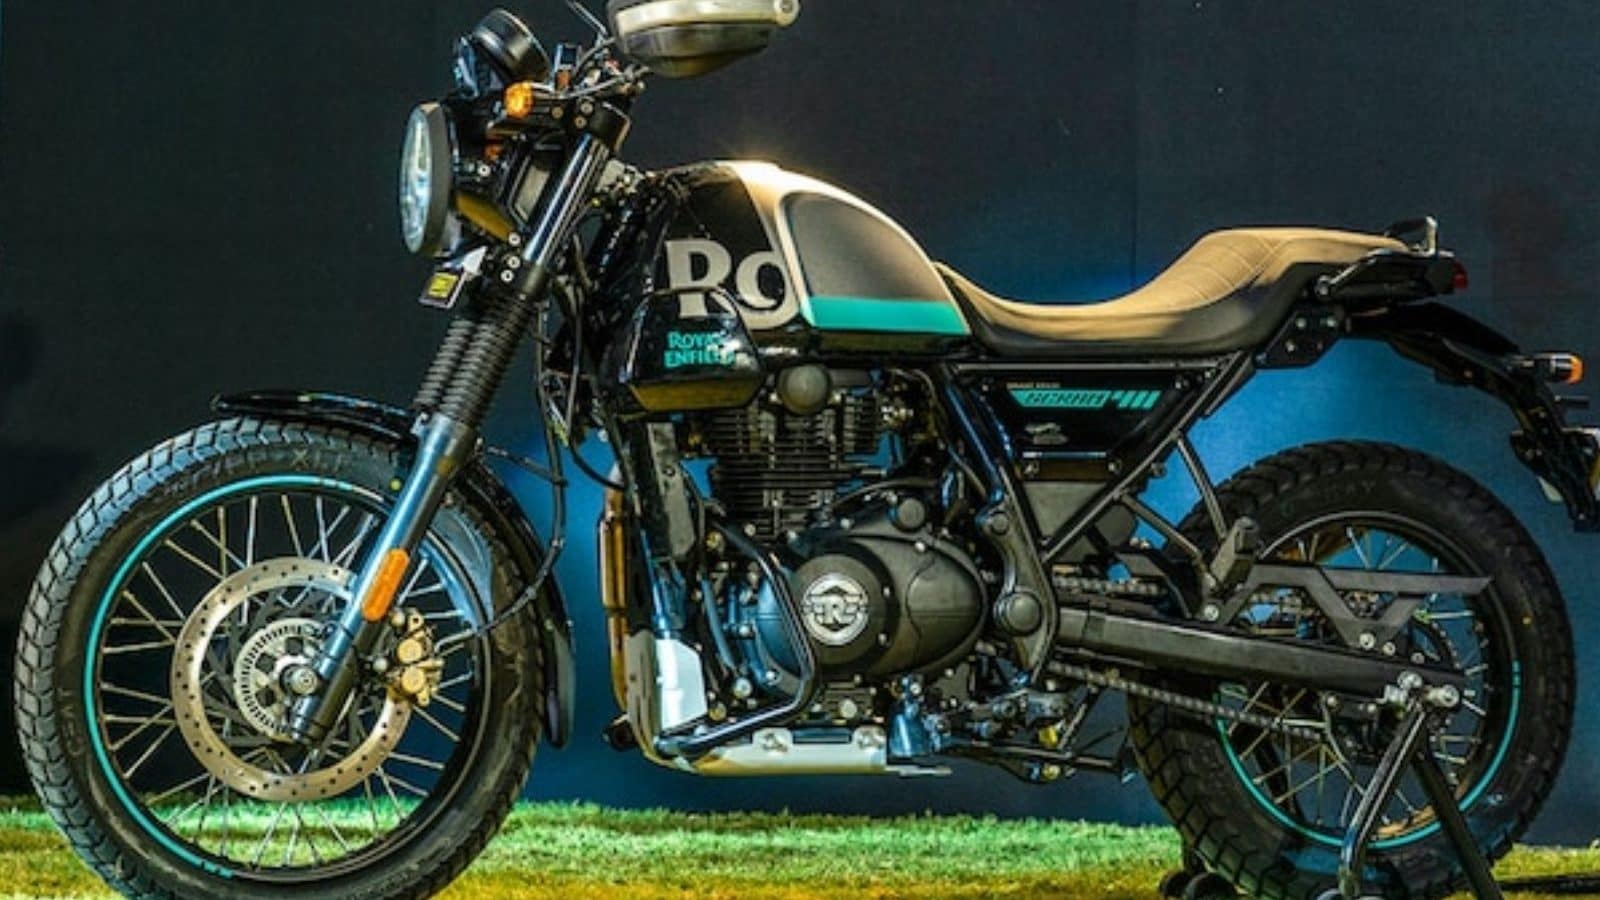 Royal Enfield Scram 411 motorcycle launched in India Price and